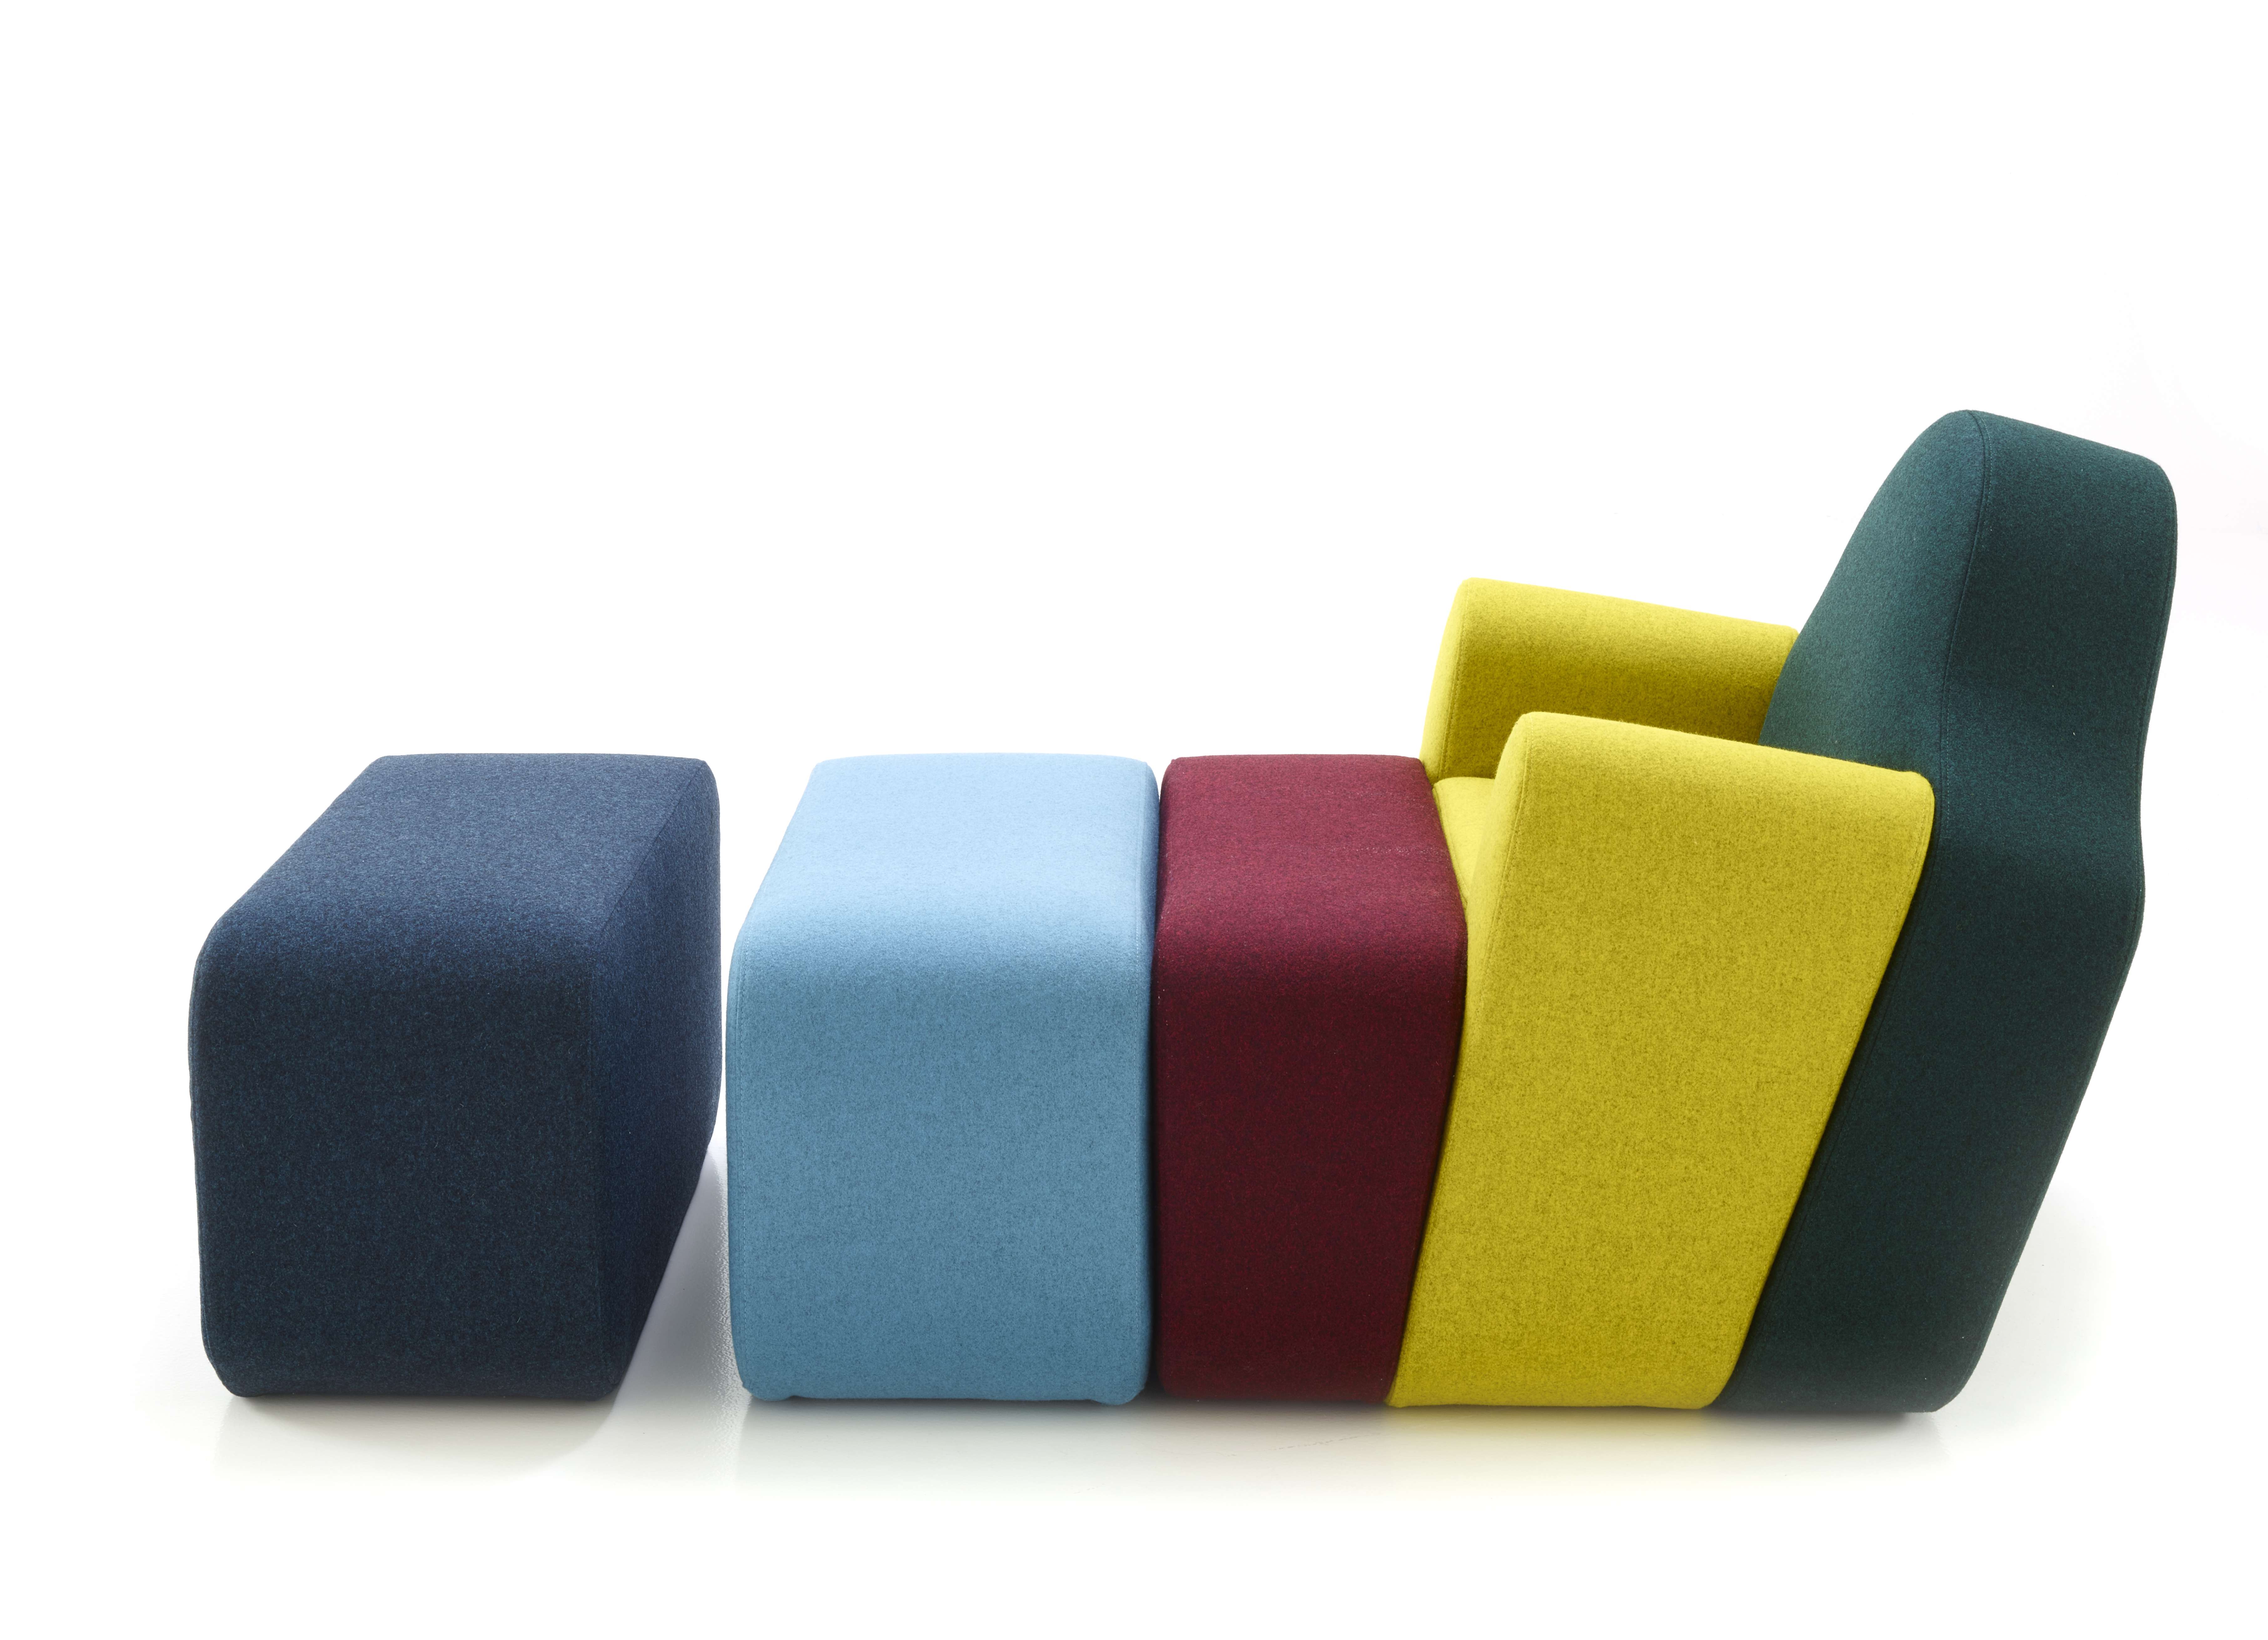 The Slice couch Pierre Charpin designed for the Cinna division of Ligne Roset